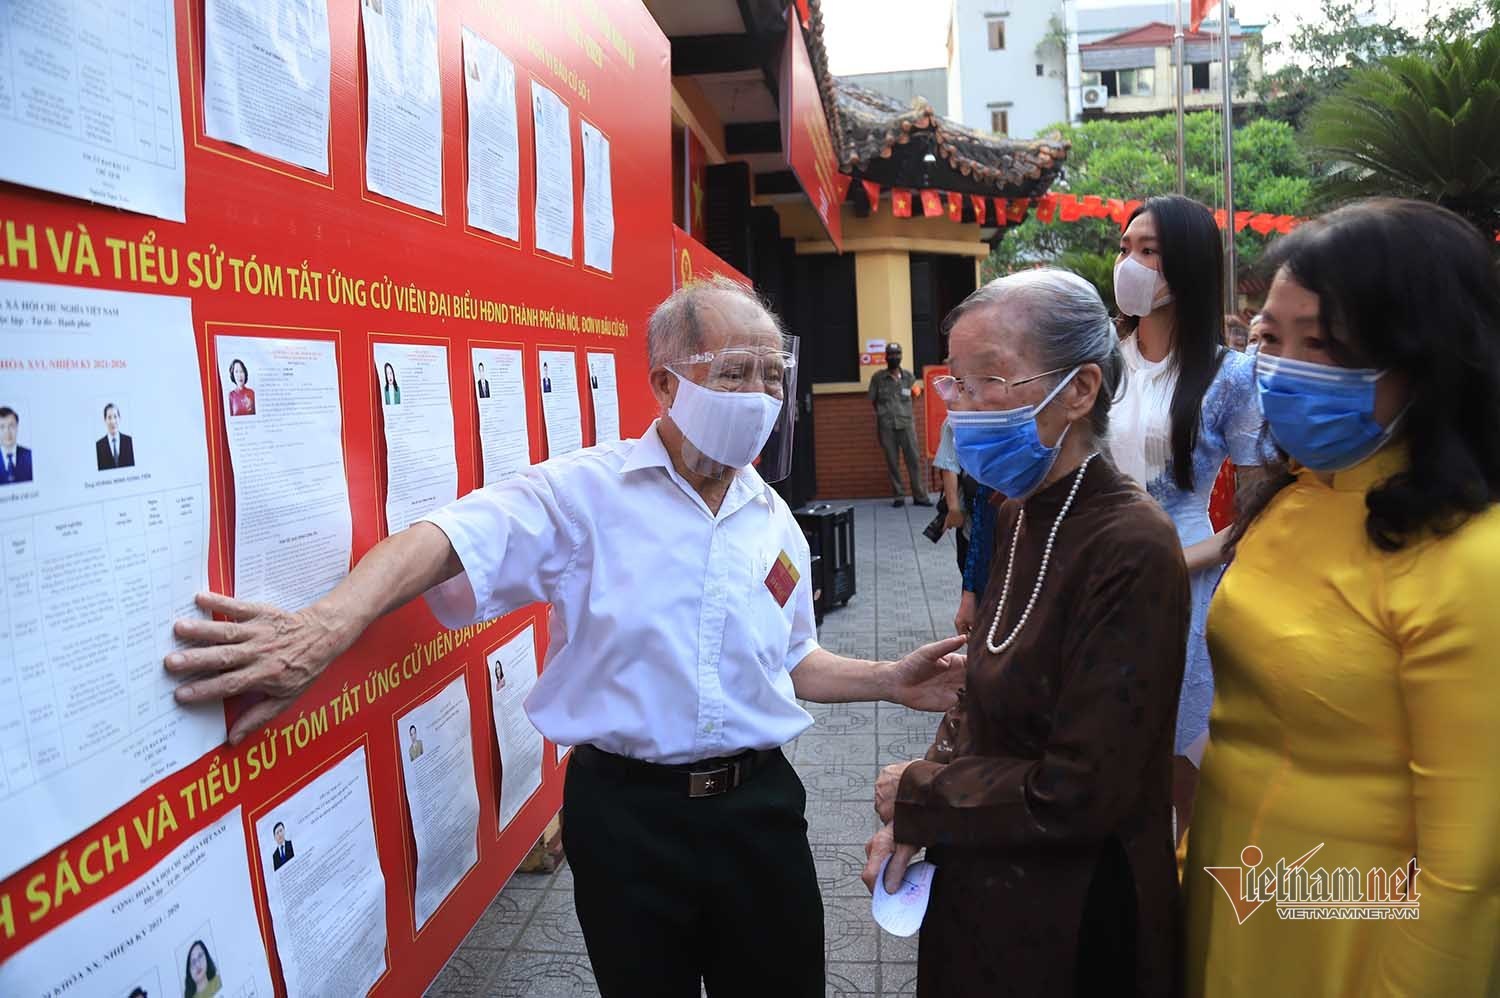 96-year-old woman and her relatives go to vote in Hanoi